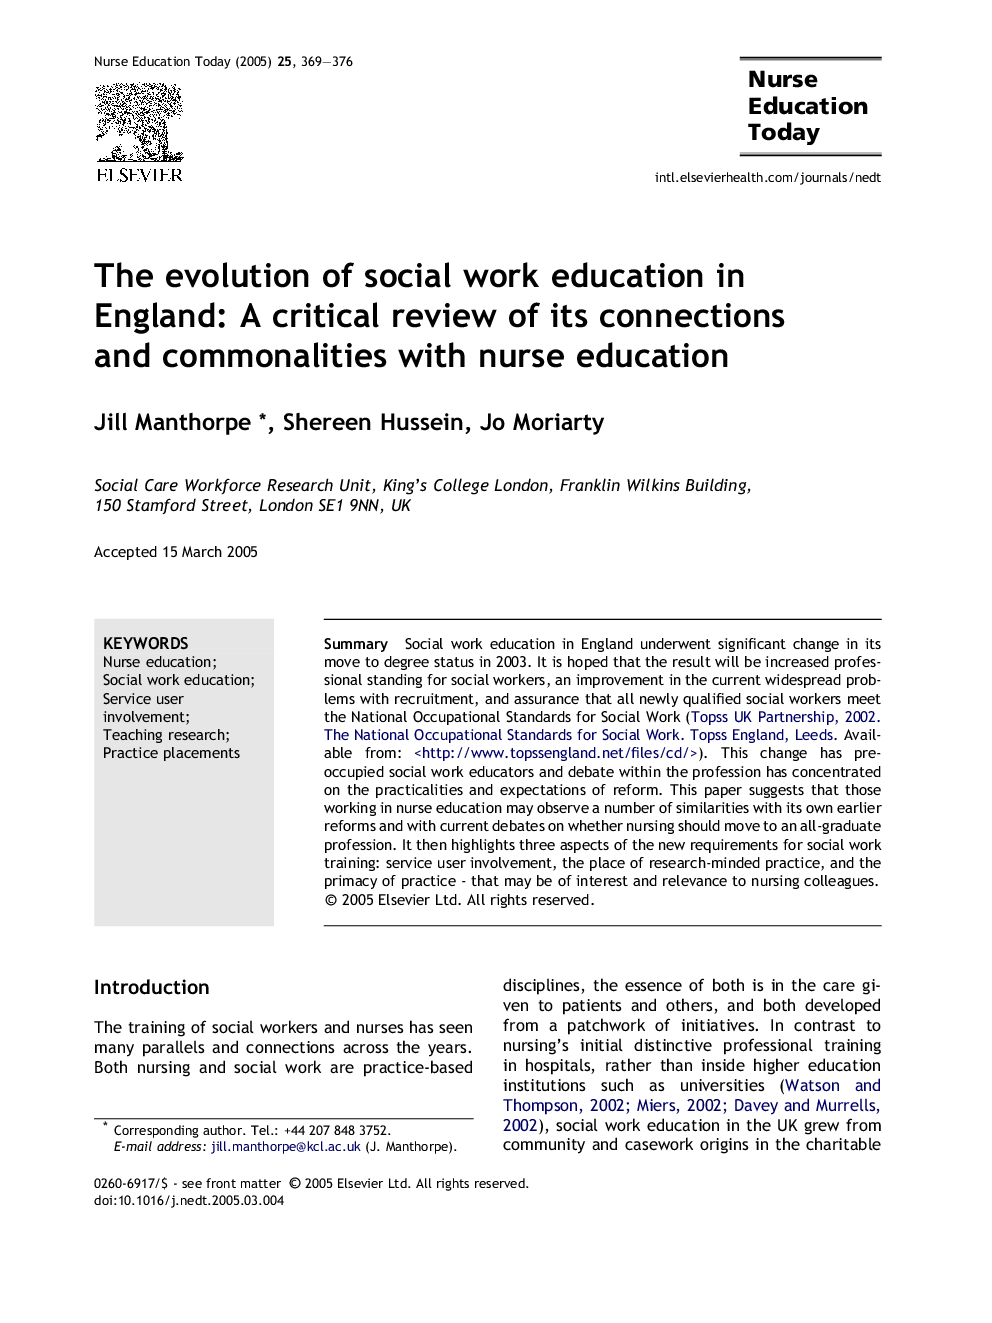 The evolution of social work education in England: A critical review of its connections and commonalities with nurse education